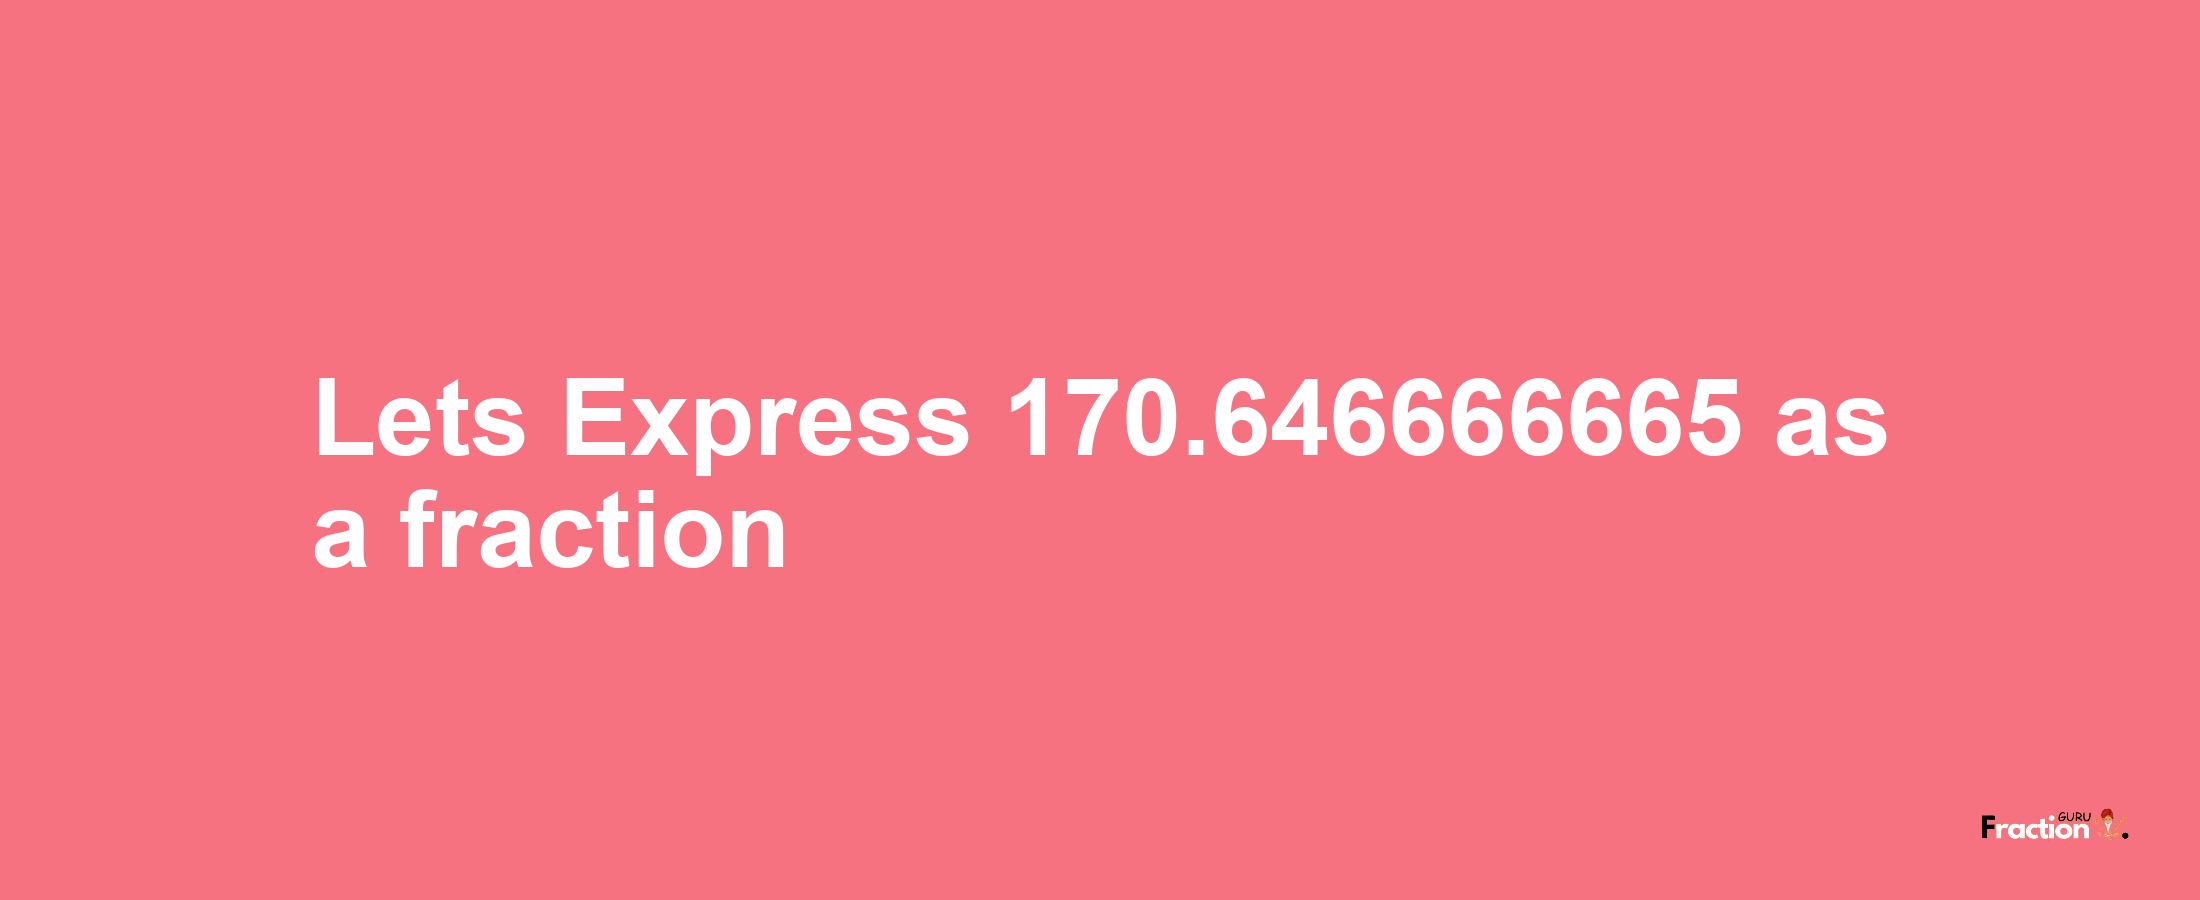 Lets Express 170.646666665 as afraction